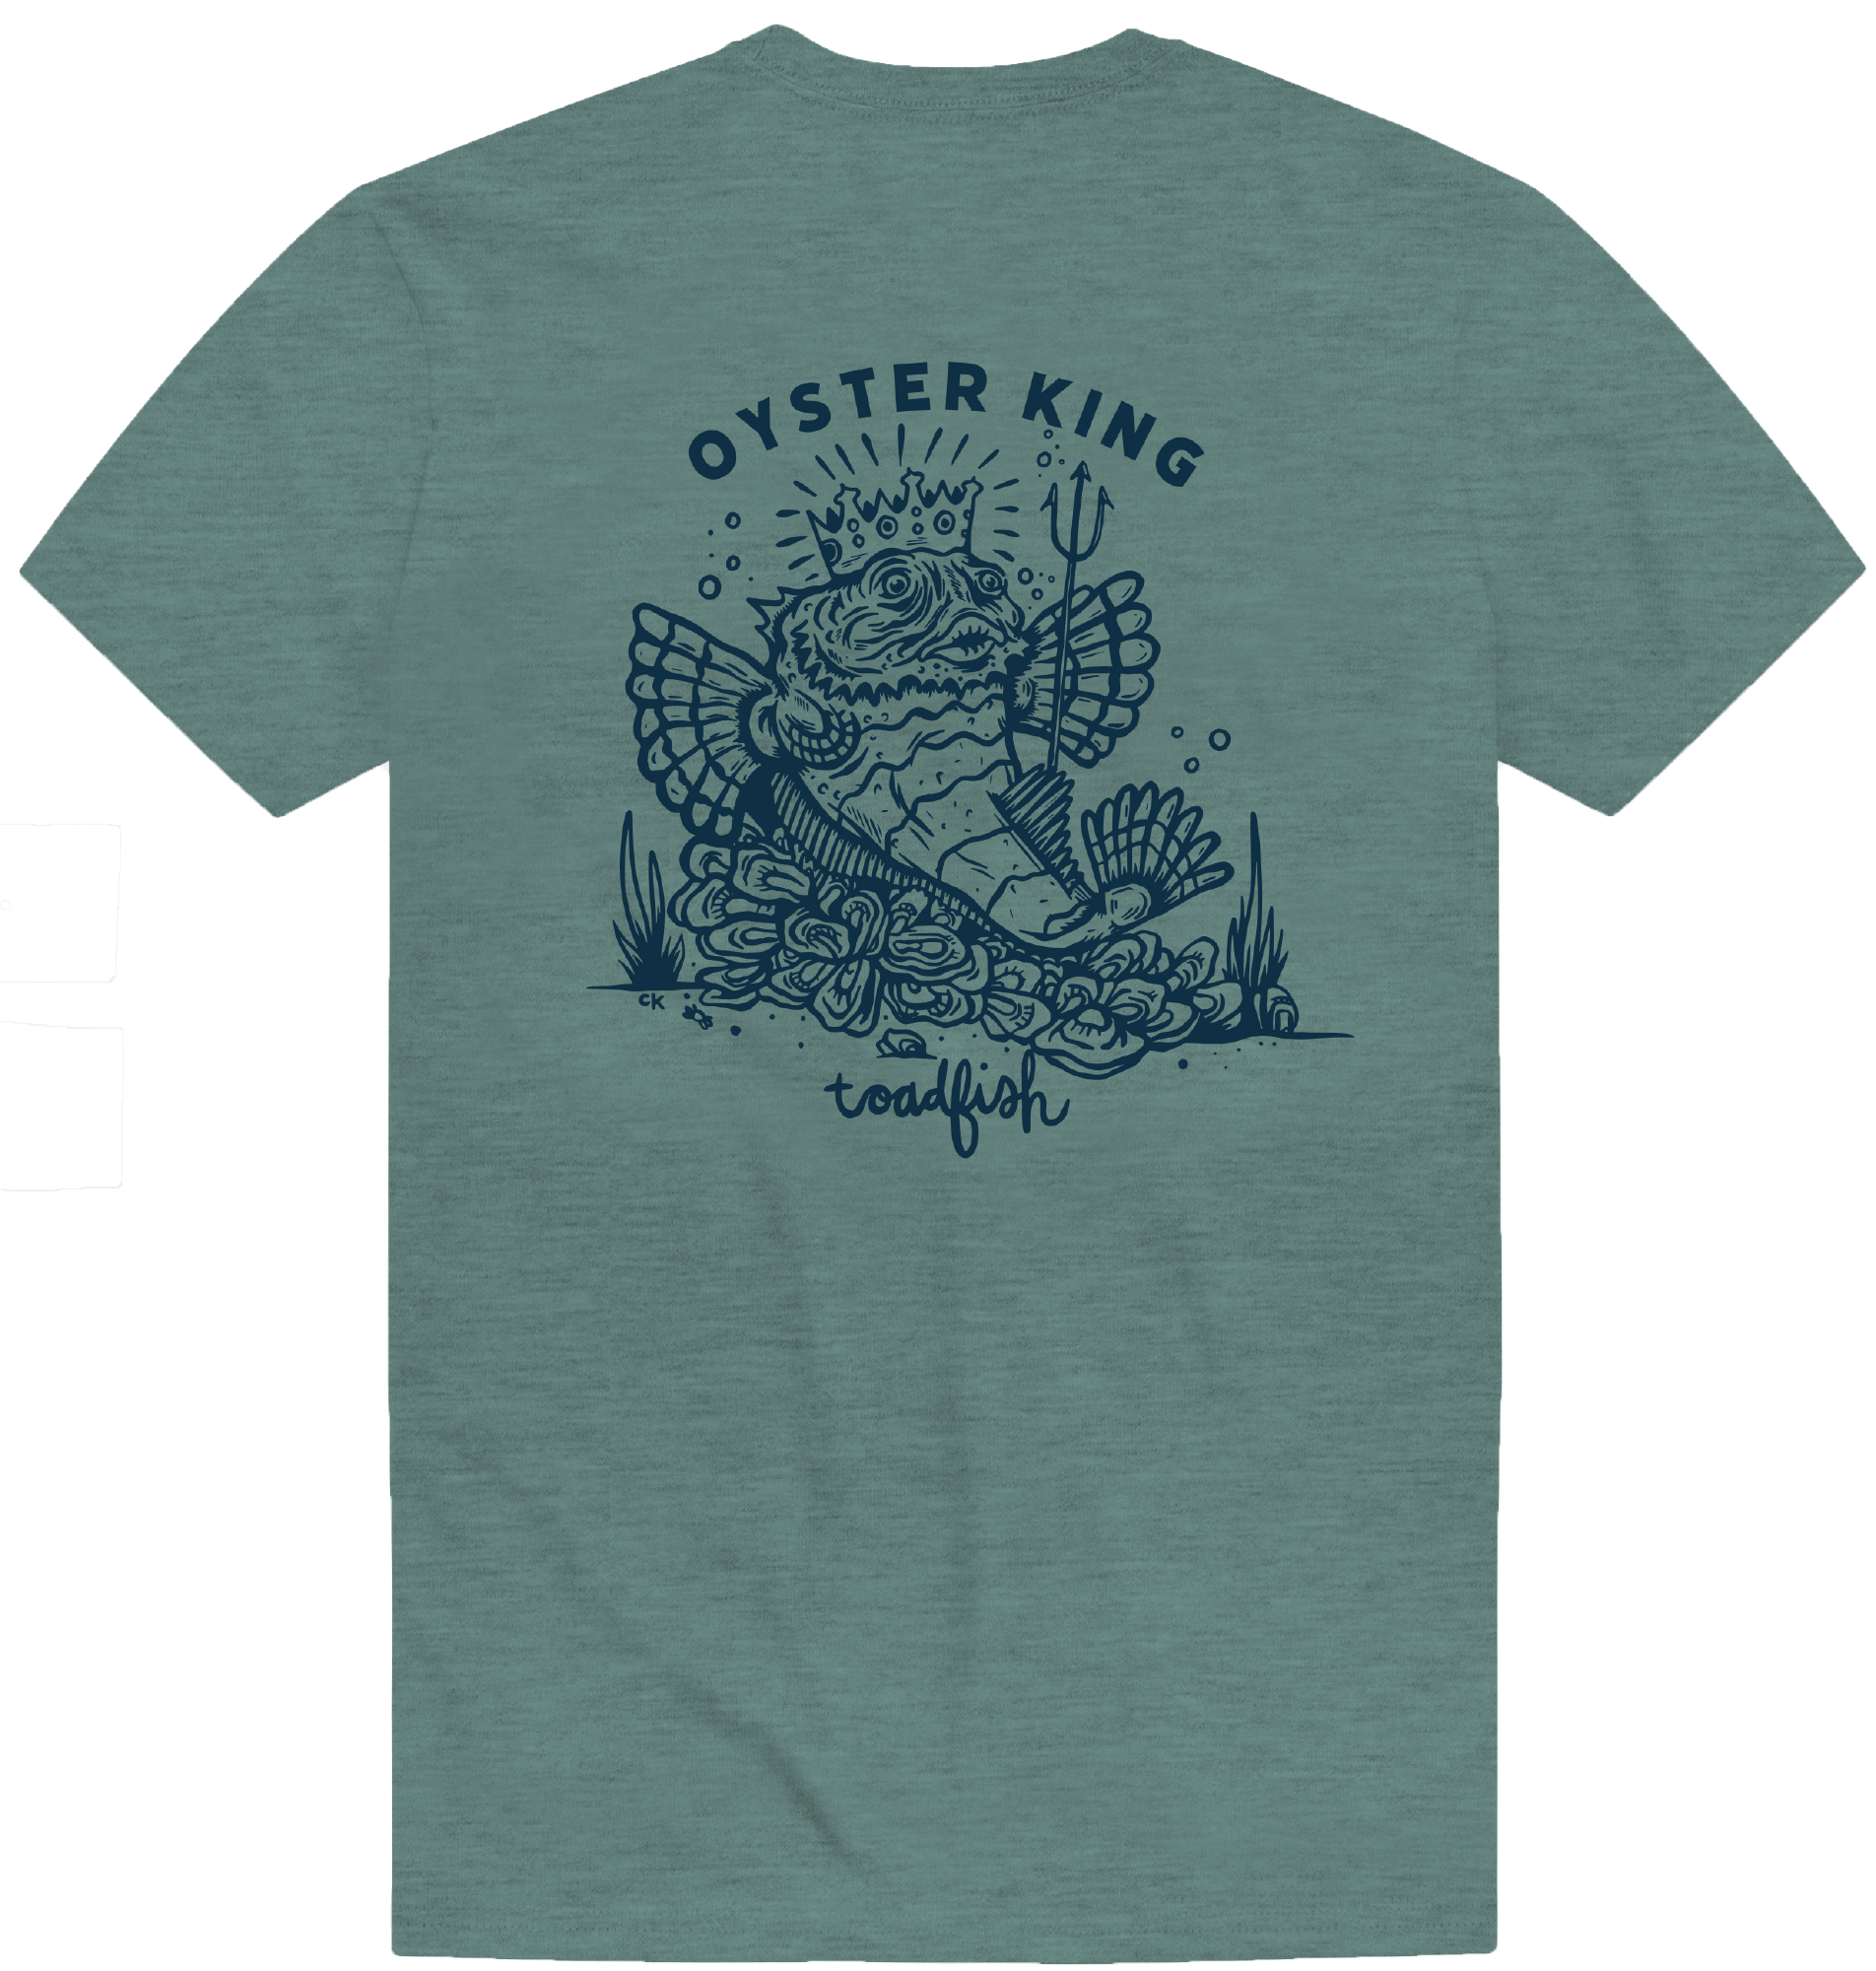 The Oyster King Tee - Toadfish - Apparel